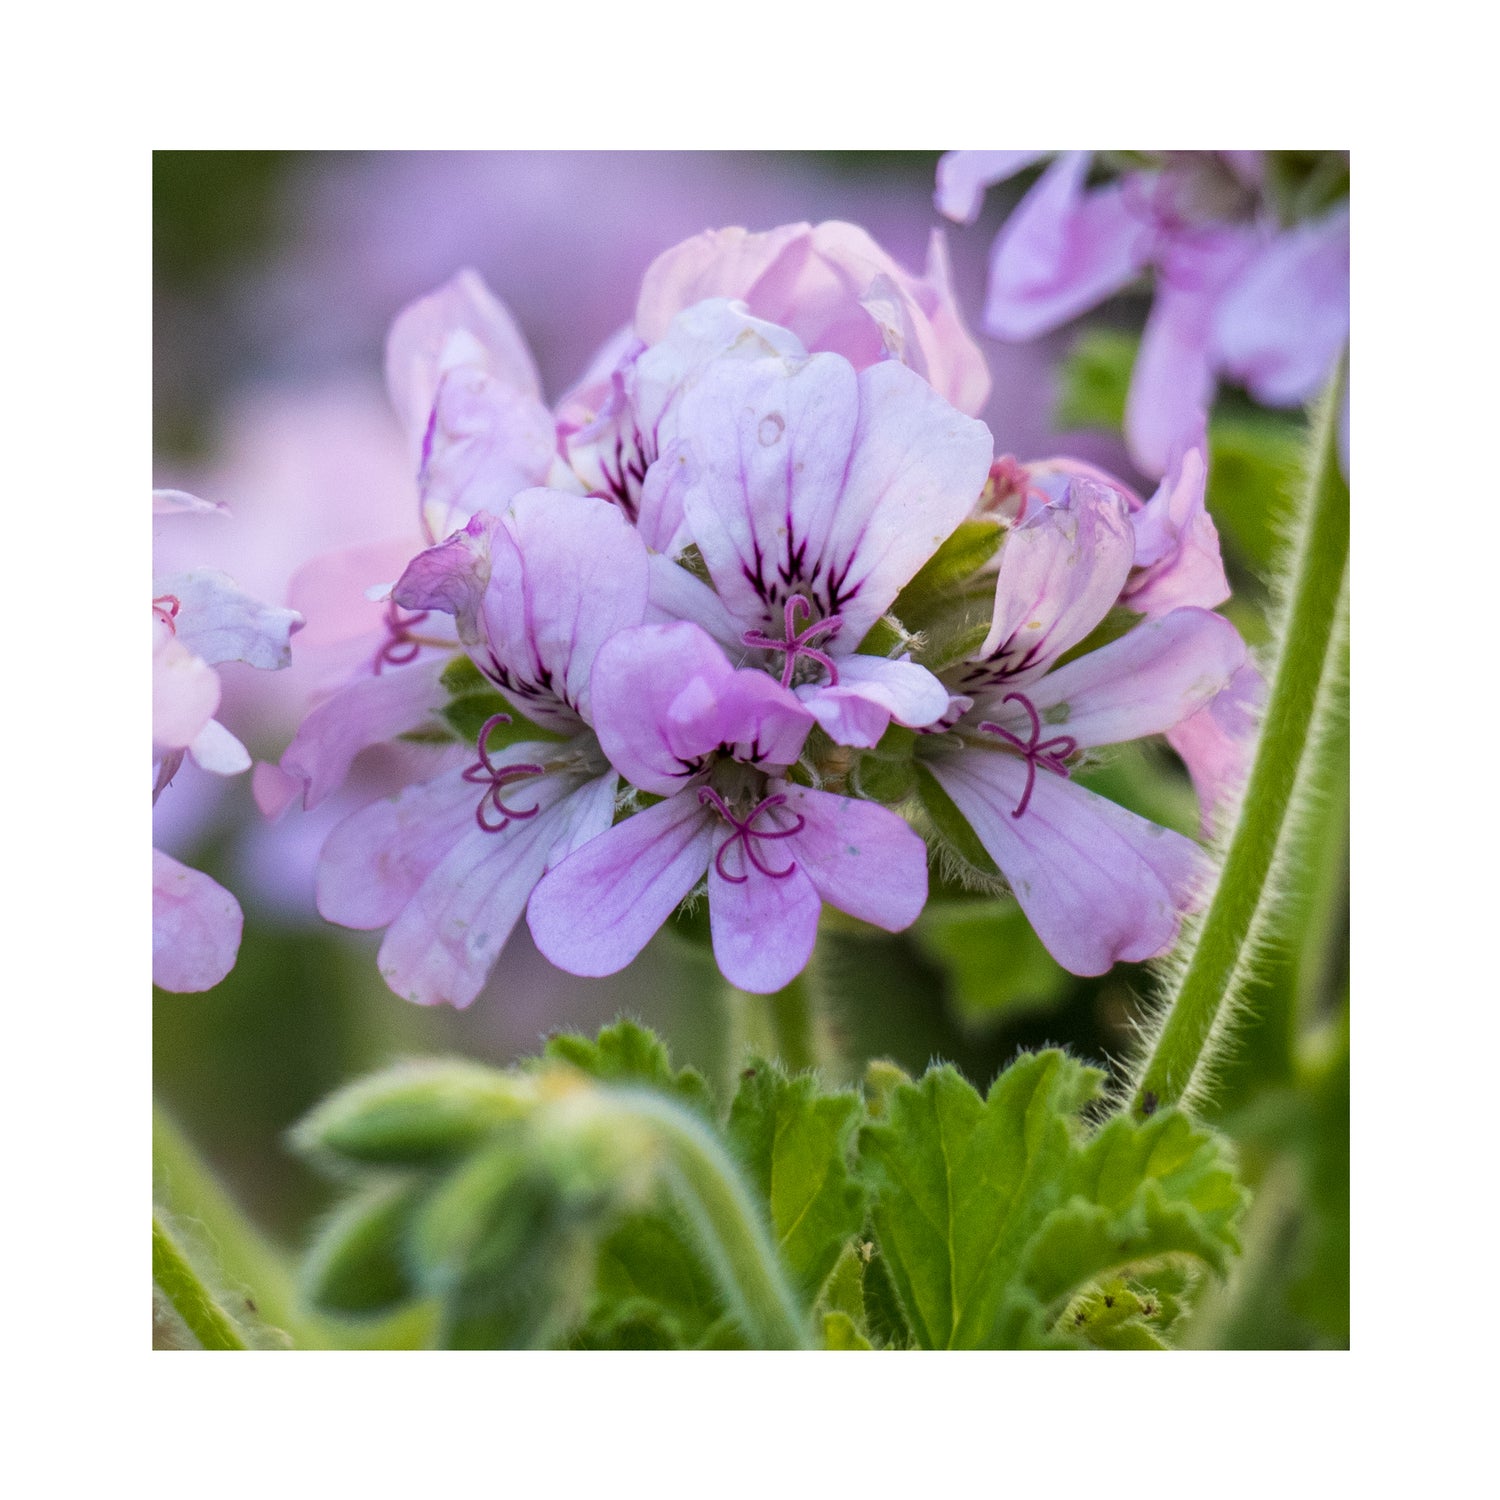 Scented Geranium Collection, 6 Plants in 9cm pots - Stunning Flowers with Scented Foliage